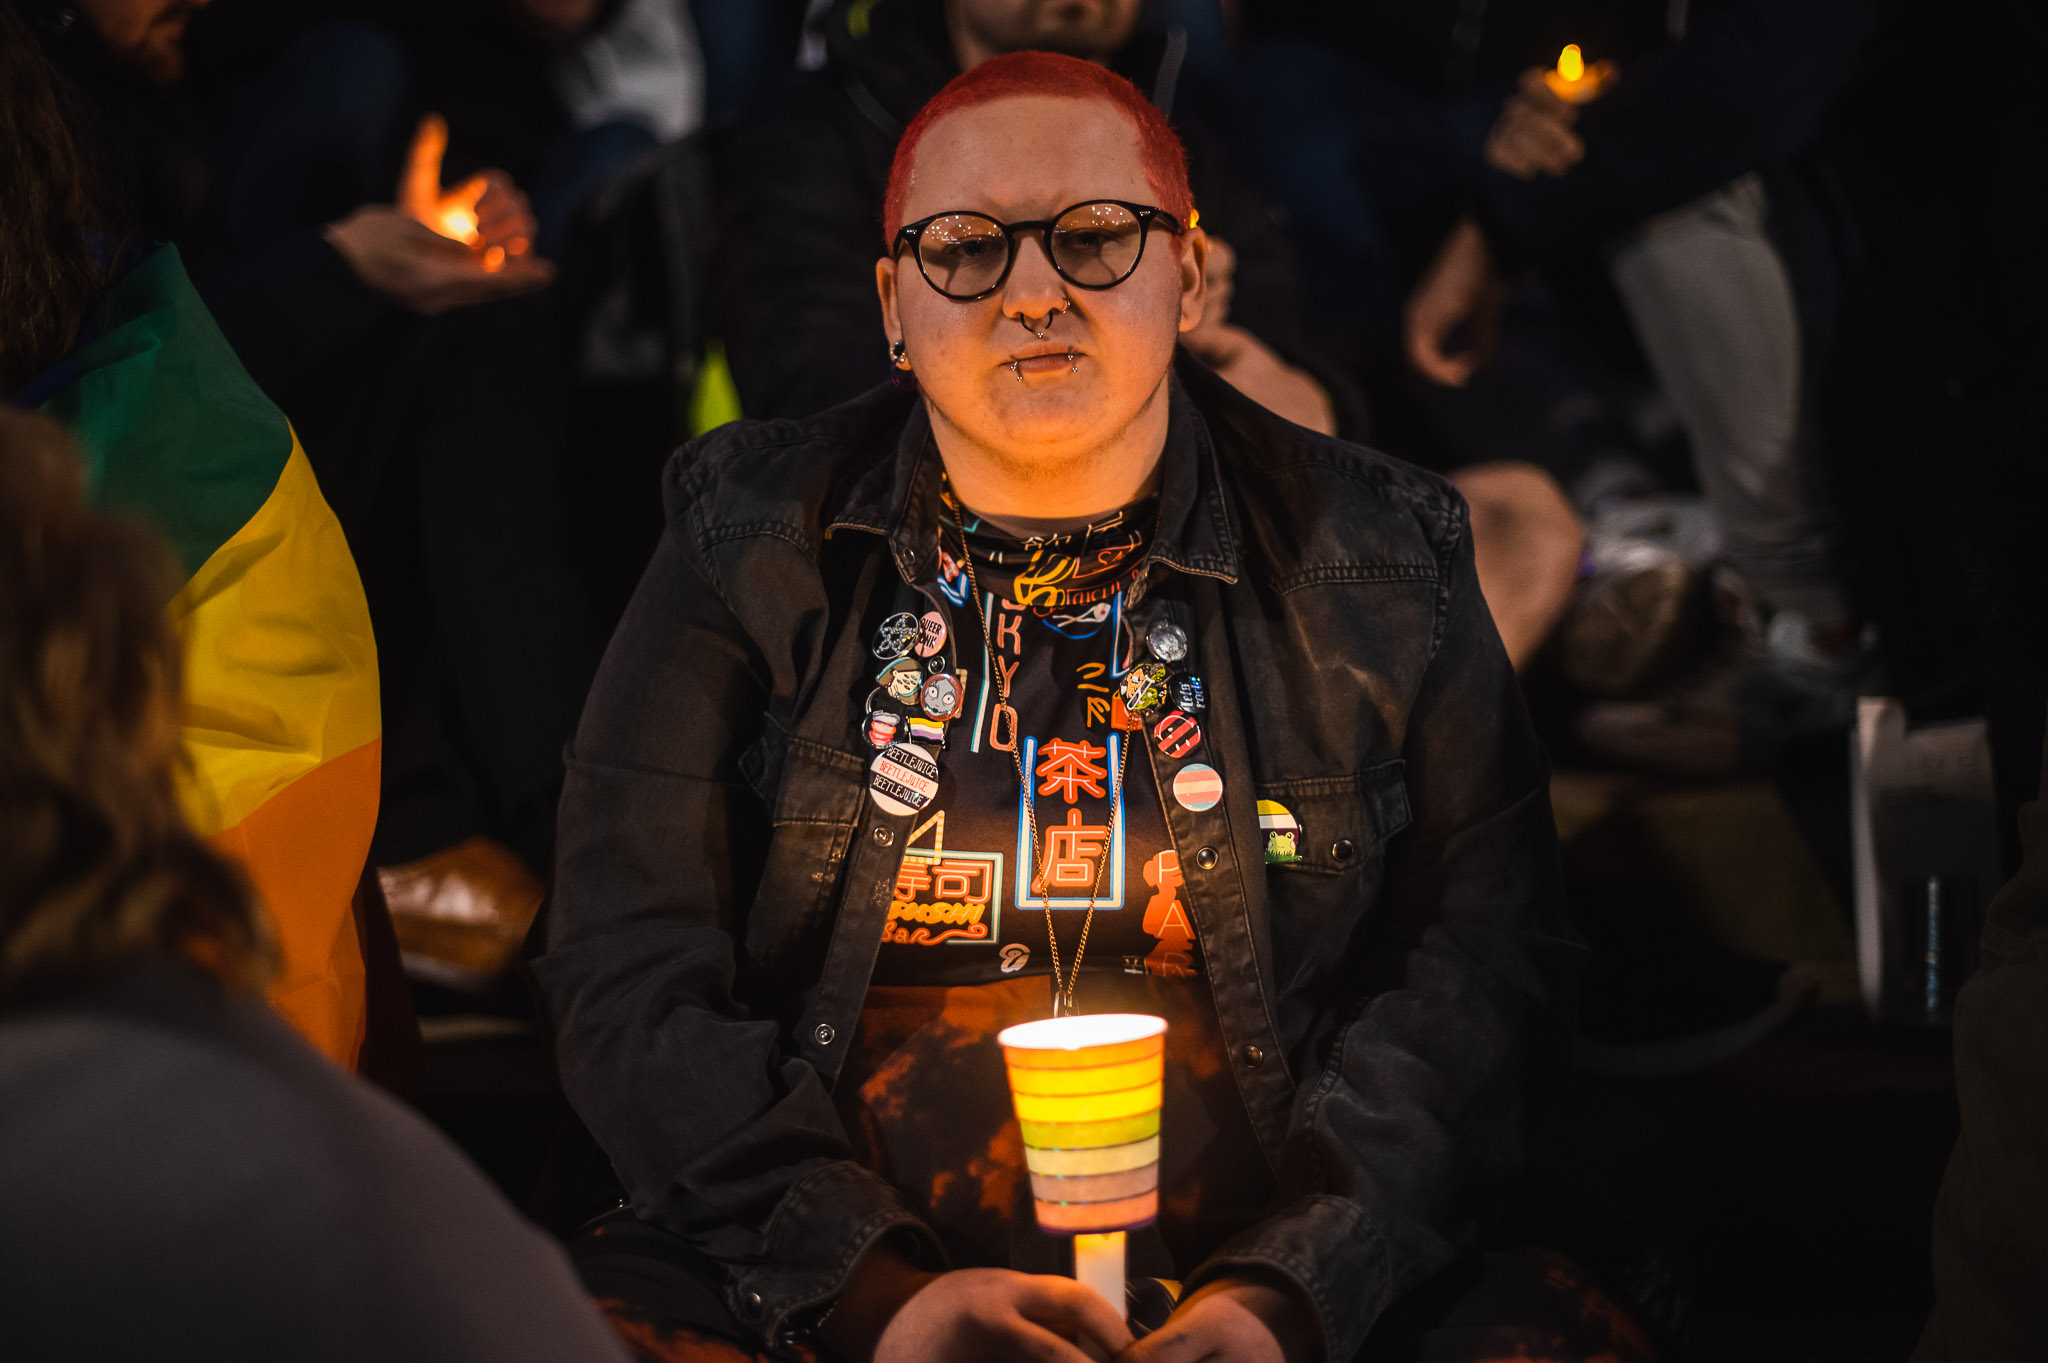 Portrait of a person with short red hair sitting on the steps of St George's Hall. They are holding a candle and looking into the camera.